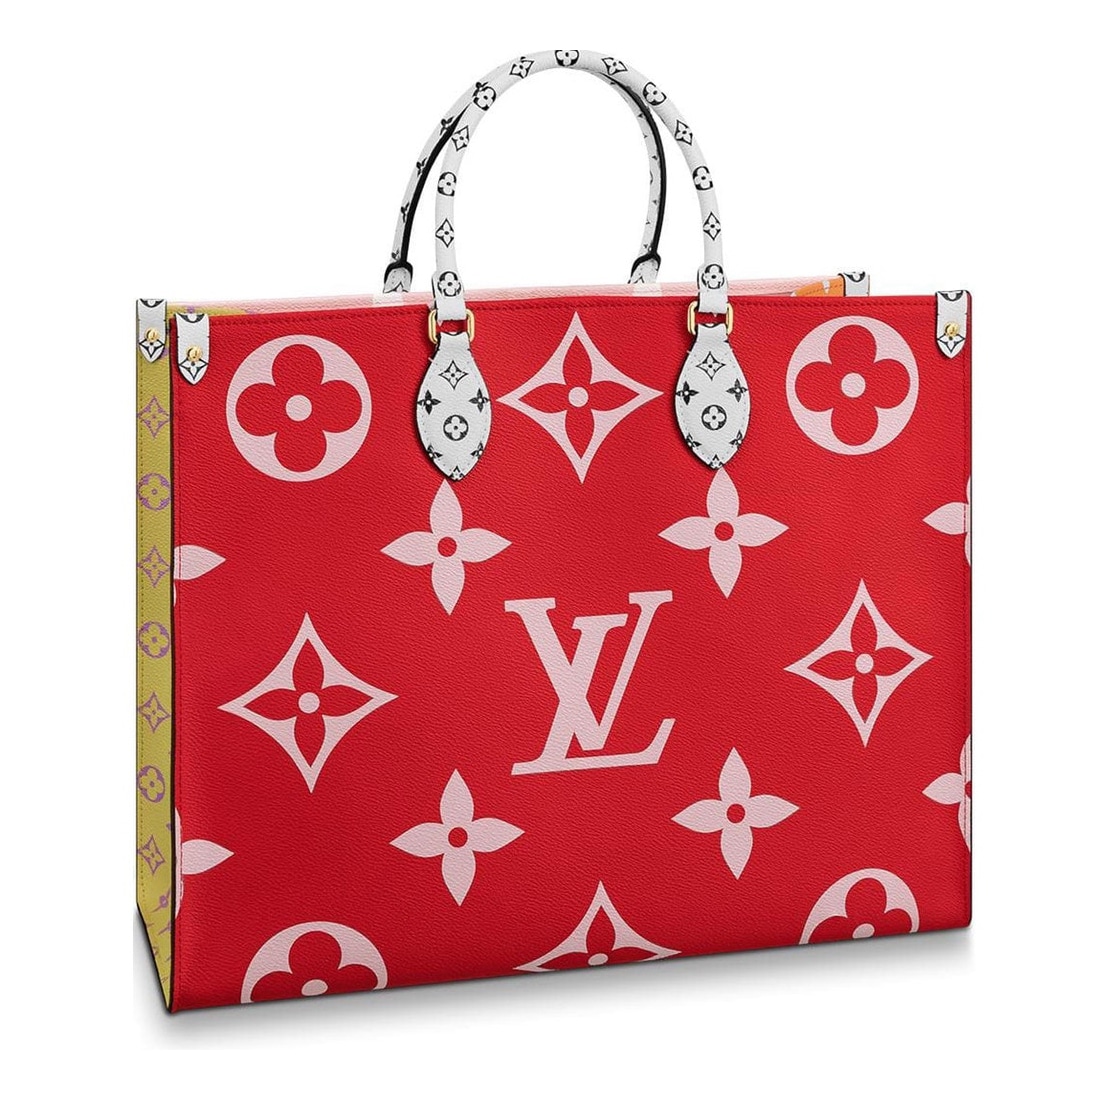 Louis Vuitton Onthego Tote Bag Reference Guide - Spotted Fashion